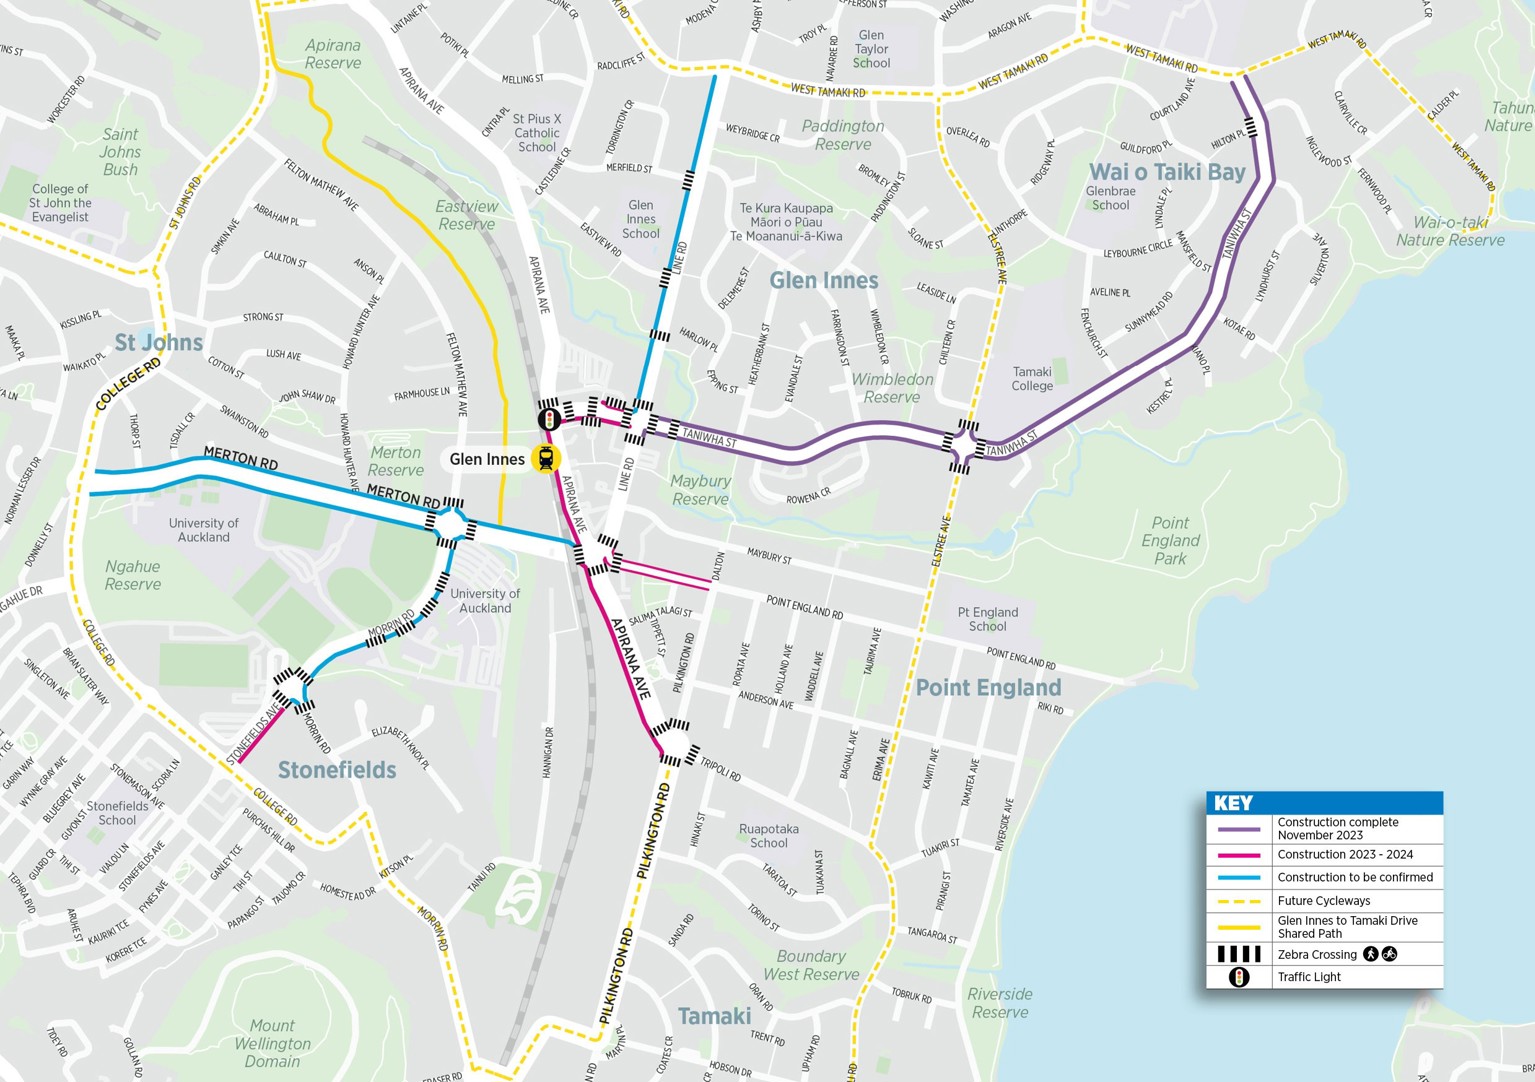 Map showing Glen Innes cycleways, including the Glen Innes to Tāmaki Drive shared path, completed construction on Taniwha Avenue, active construction on Apirana Avenue, construction to be confirmed on Merton Road and future cycleways on West Tāmaki Road